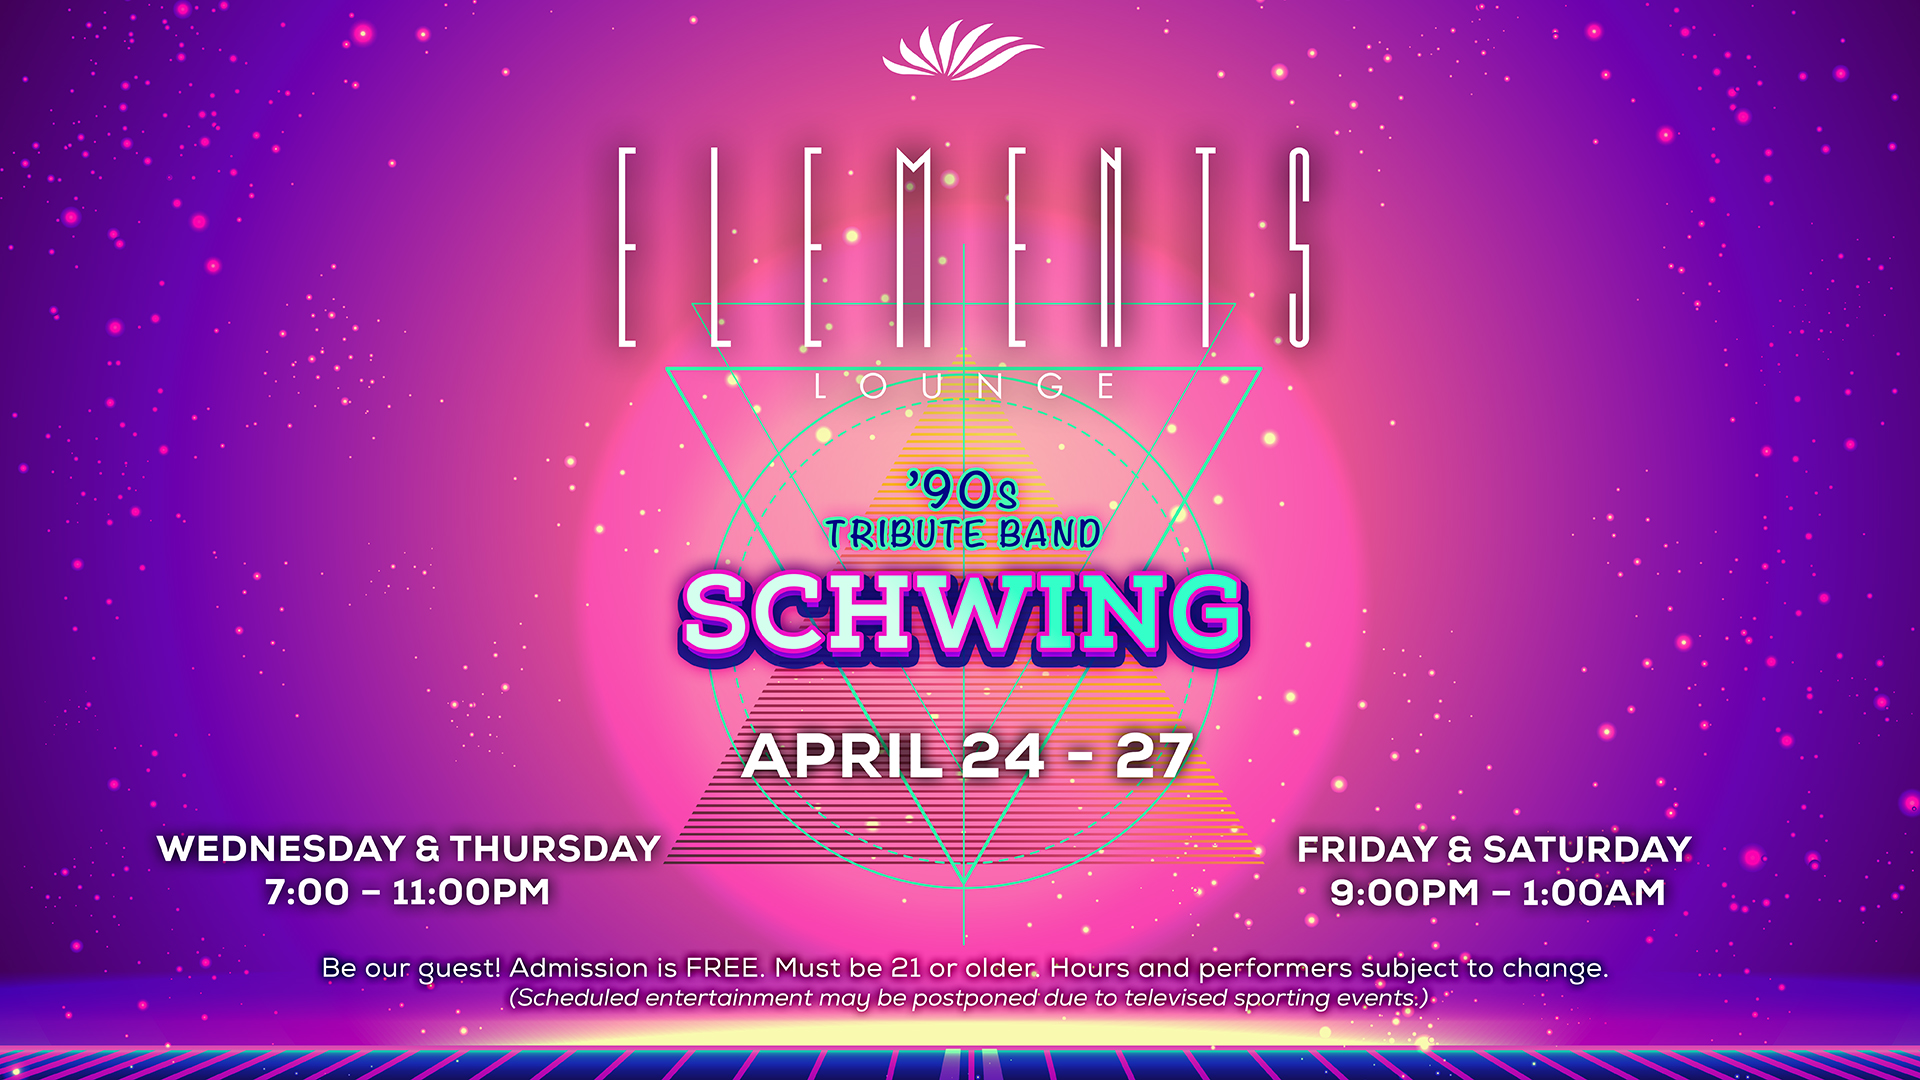 Schwing Performs Live At Seven Feathers Casino Resort In Canyonville Oregon